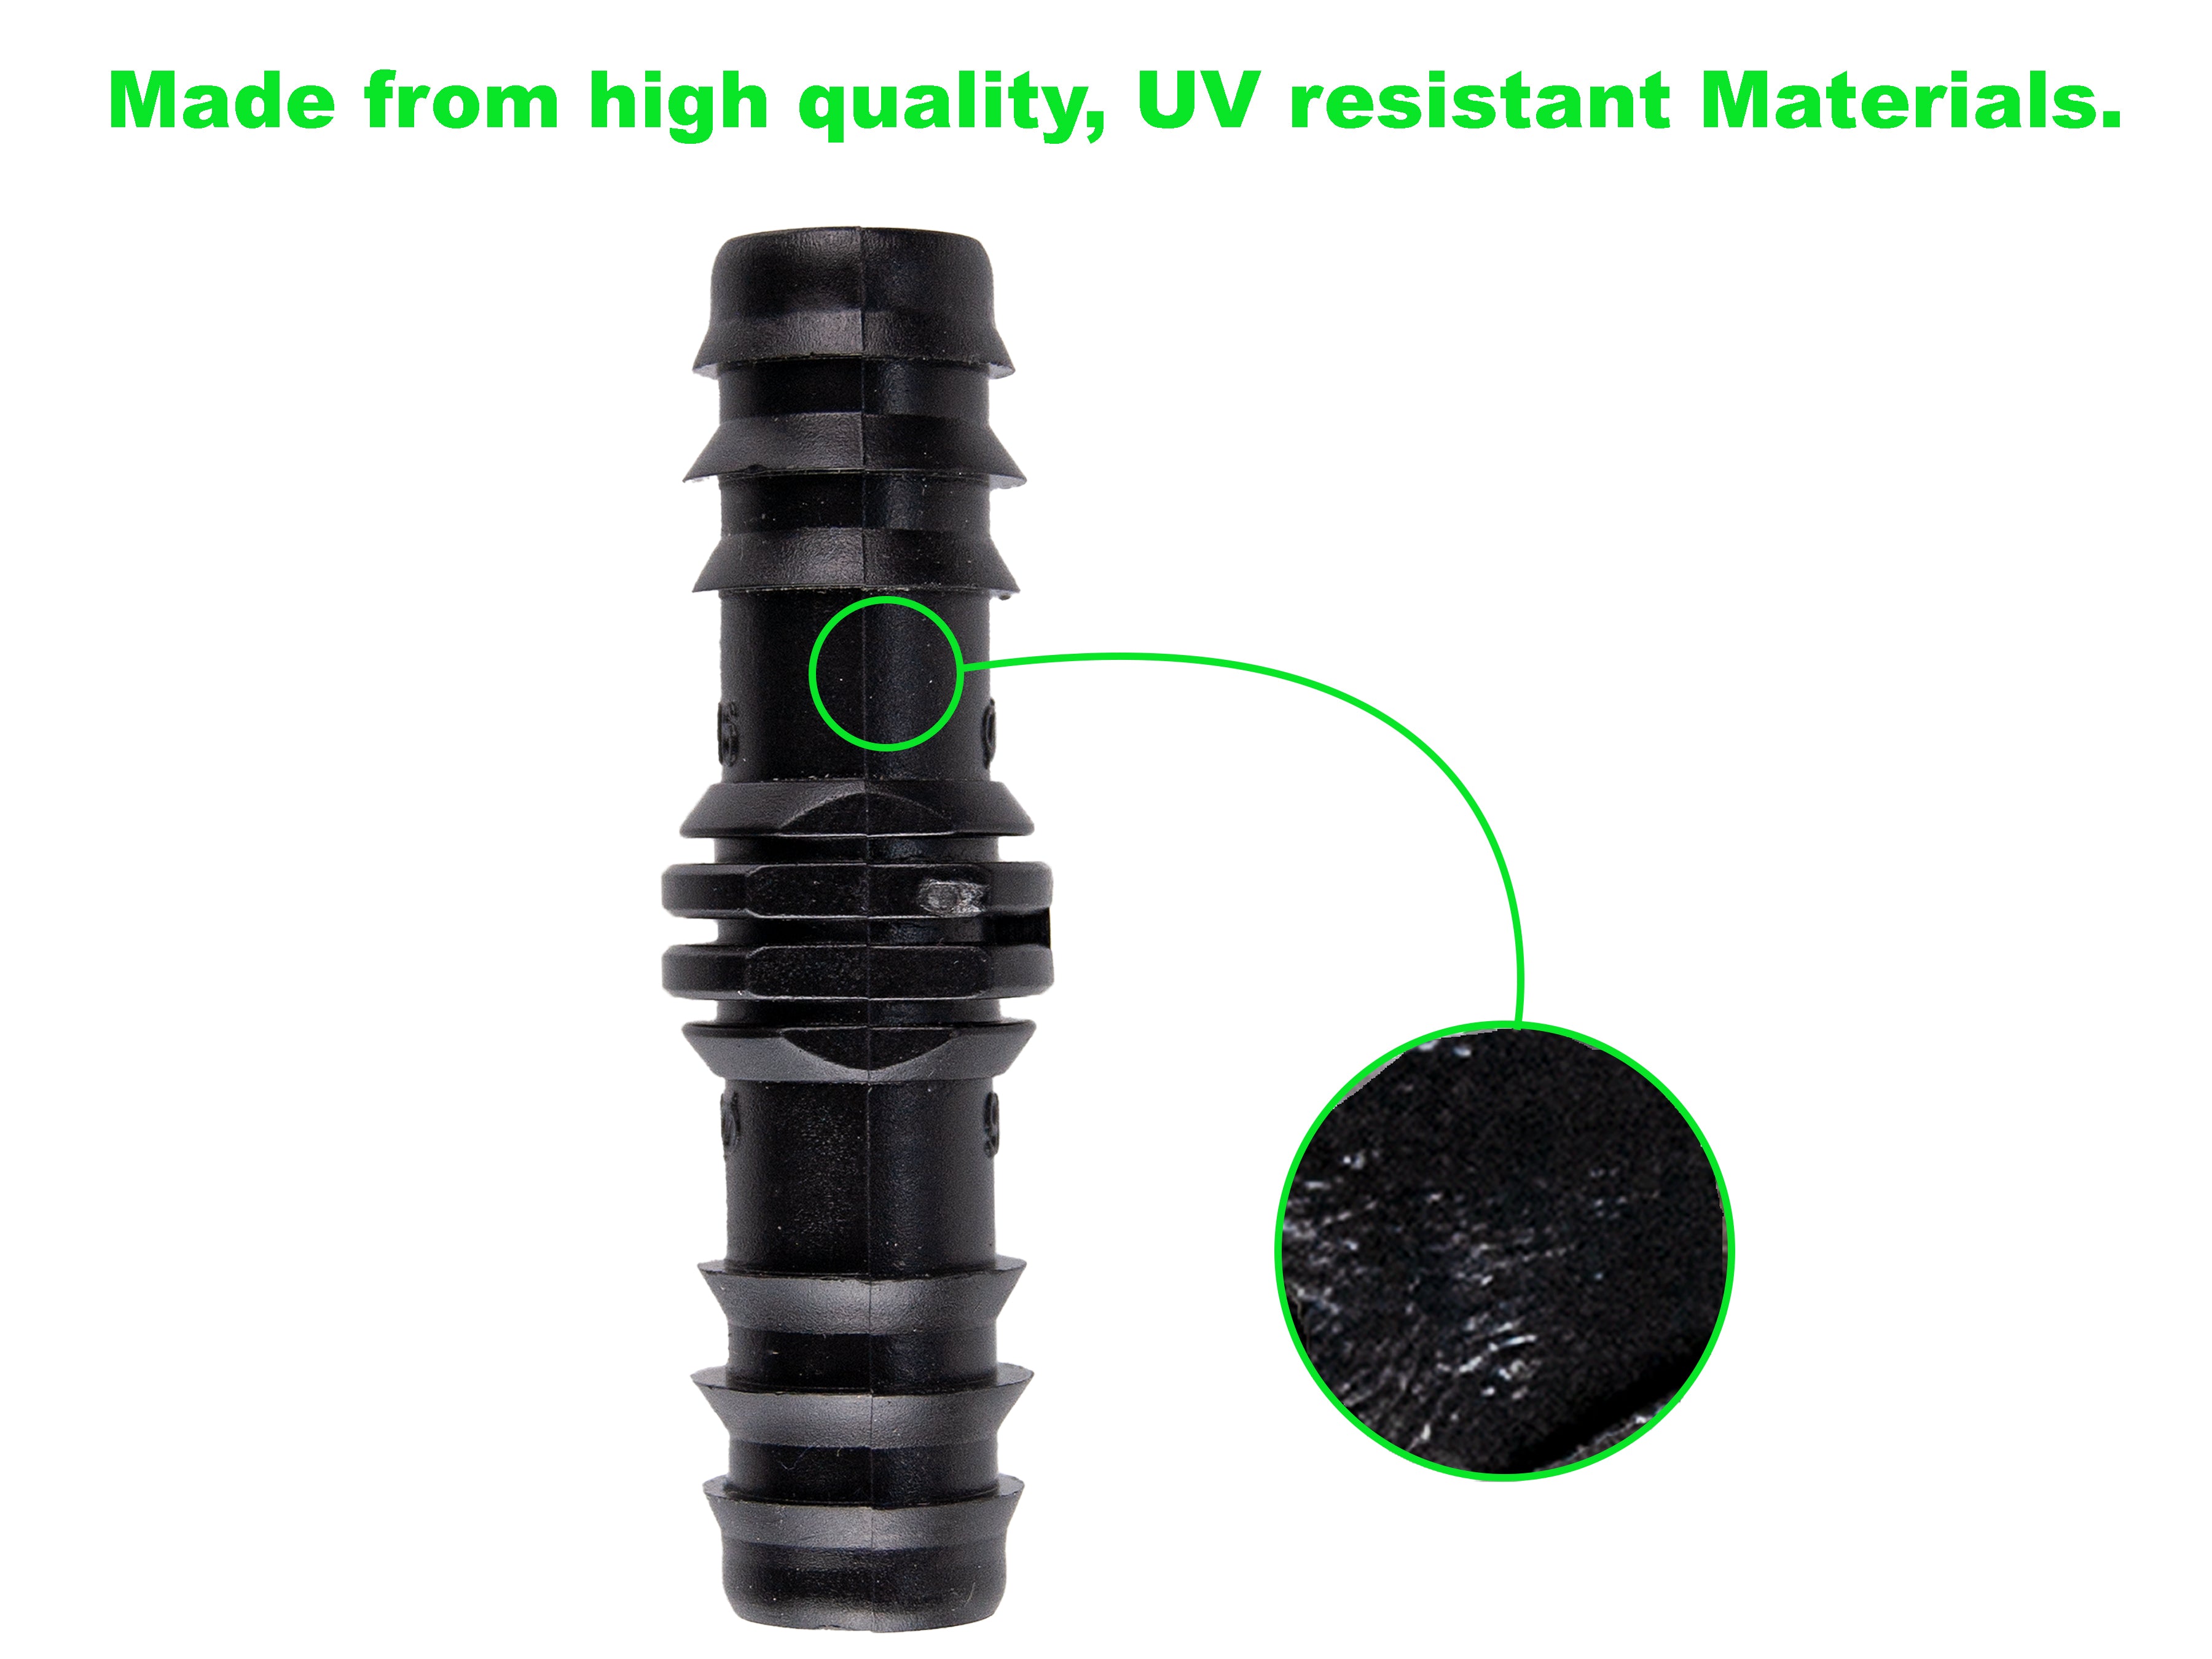 Viagrow Plastic Barbed Straight Connector’s Irrigation Fitting for ½ inch I.D, Black, Case of 6